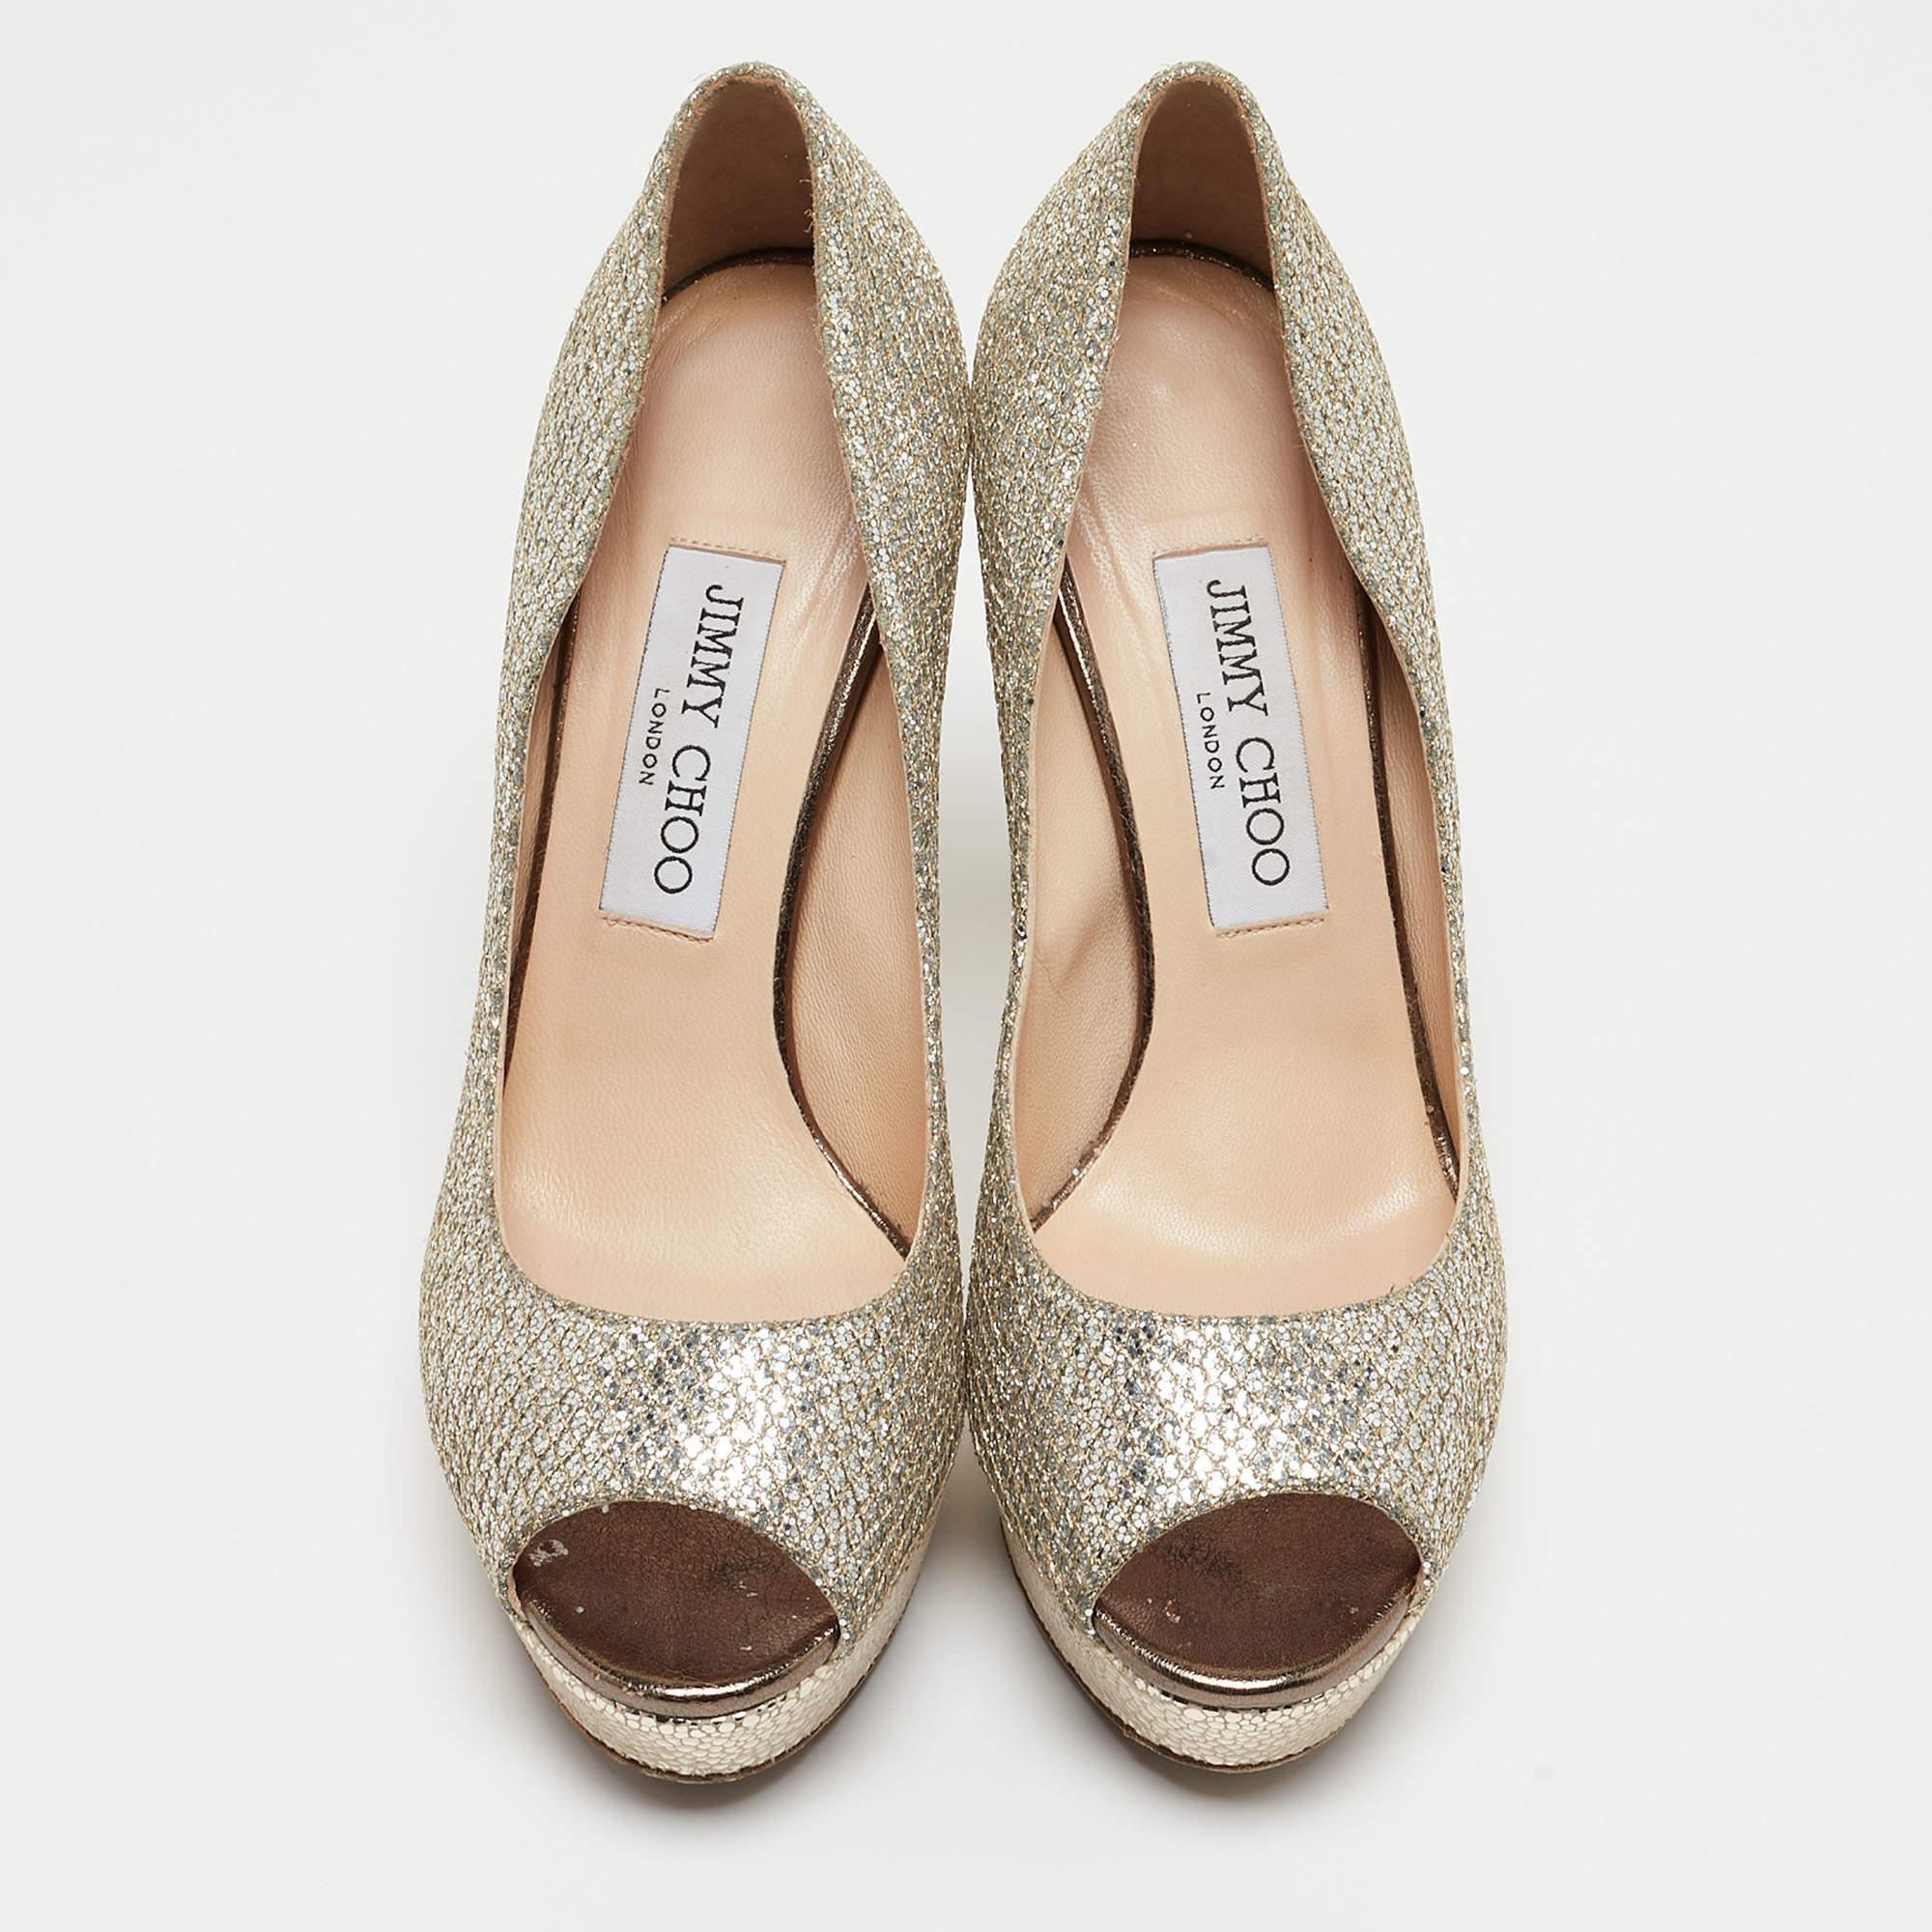 Wear these Luna pumps from the house of Jimmy Choo and channel your inner fashionista. This pair of pumps are glamorous and crafted from silver-hued glitter. They have peep toes, platforms, and 11cm heels. They are finished with leather soles.

